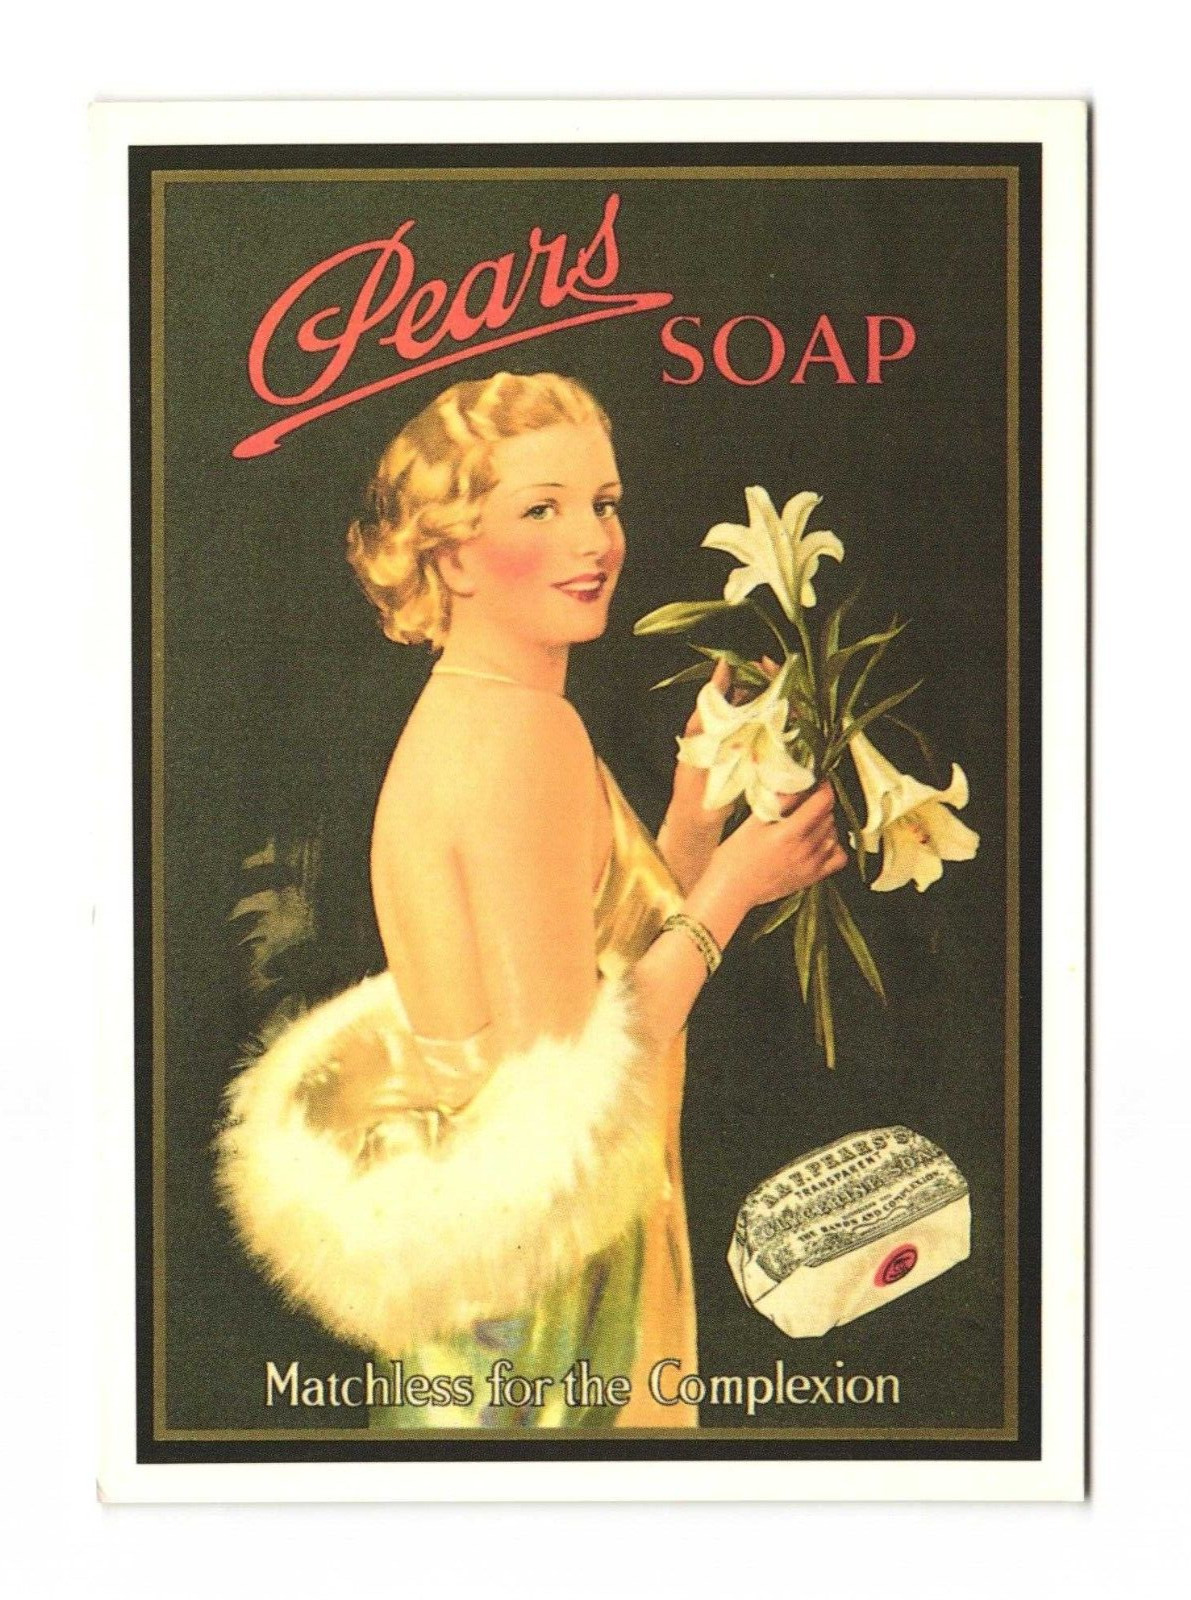 Pears Soap Matchless for the Complexion Glamorous Ladies Series Postcard 4x6